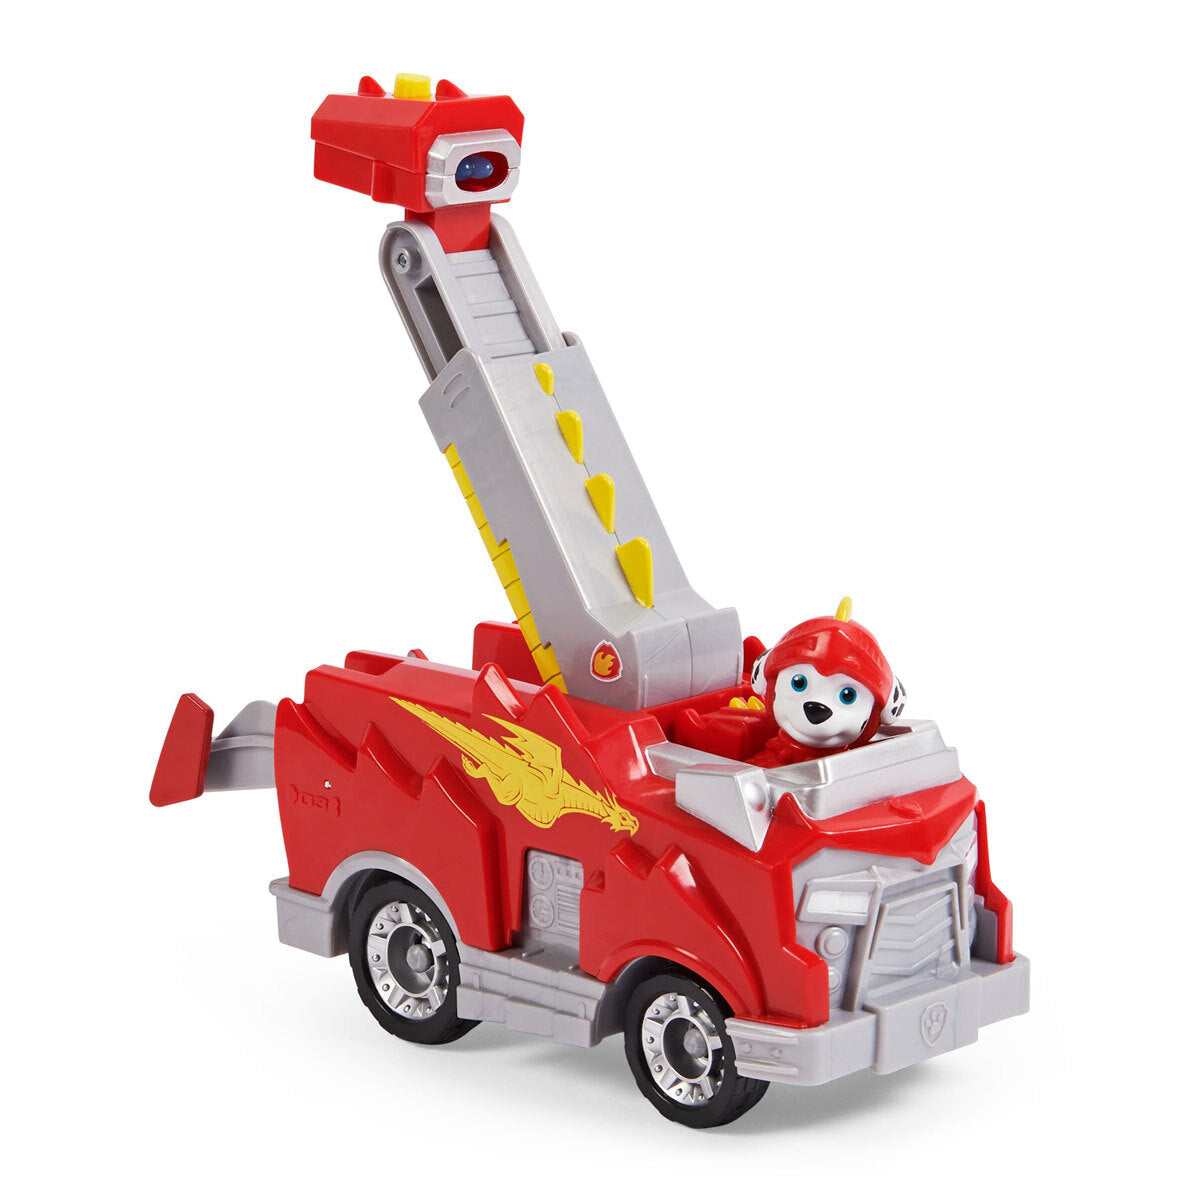 Paw Patrol Rescue Knights Marshall's Deluxe Vehicle